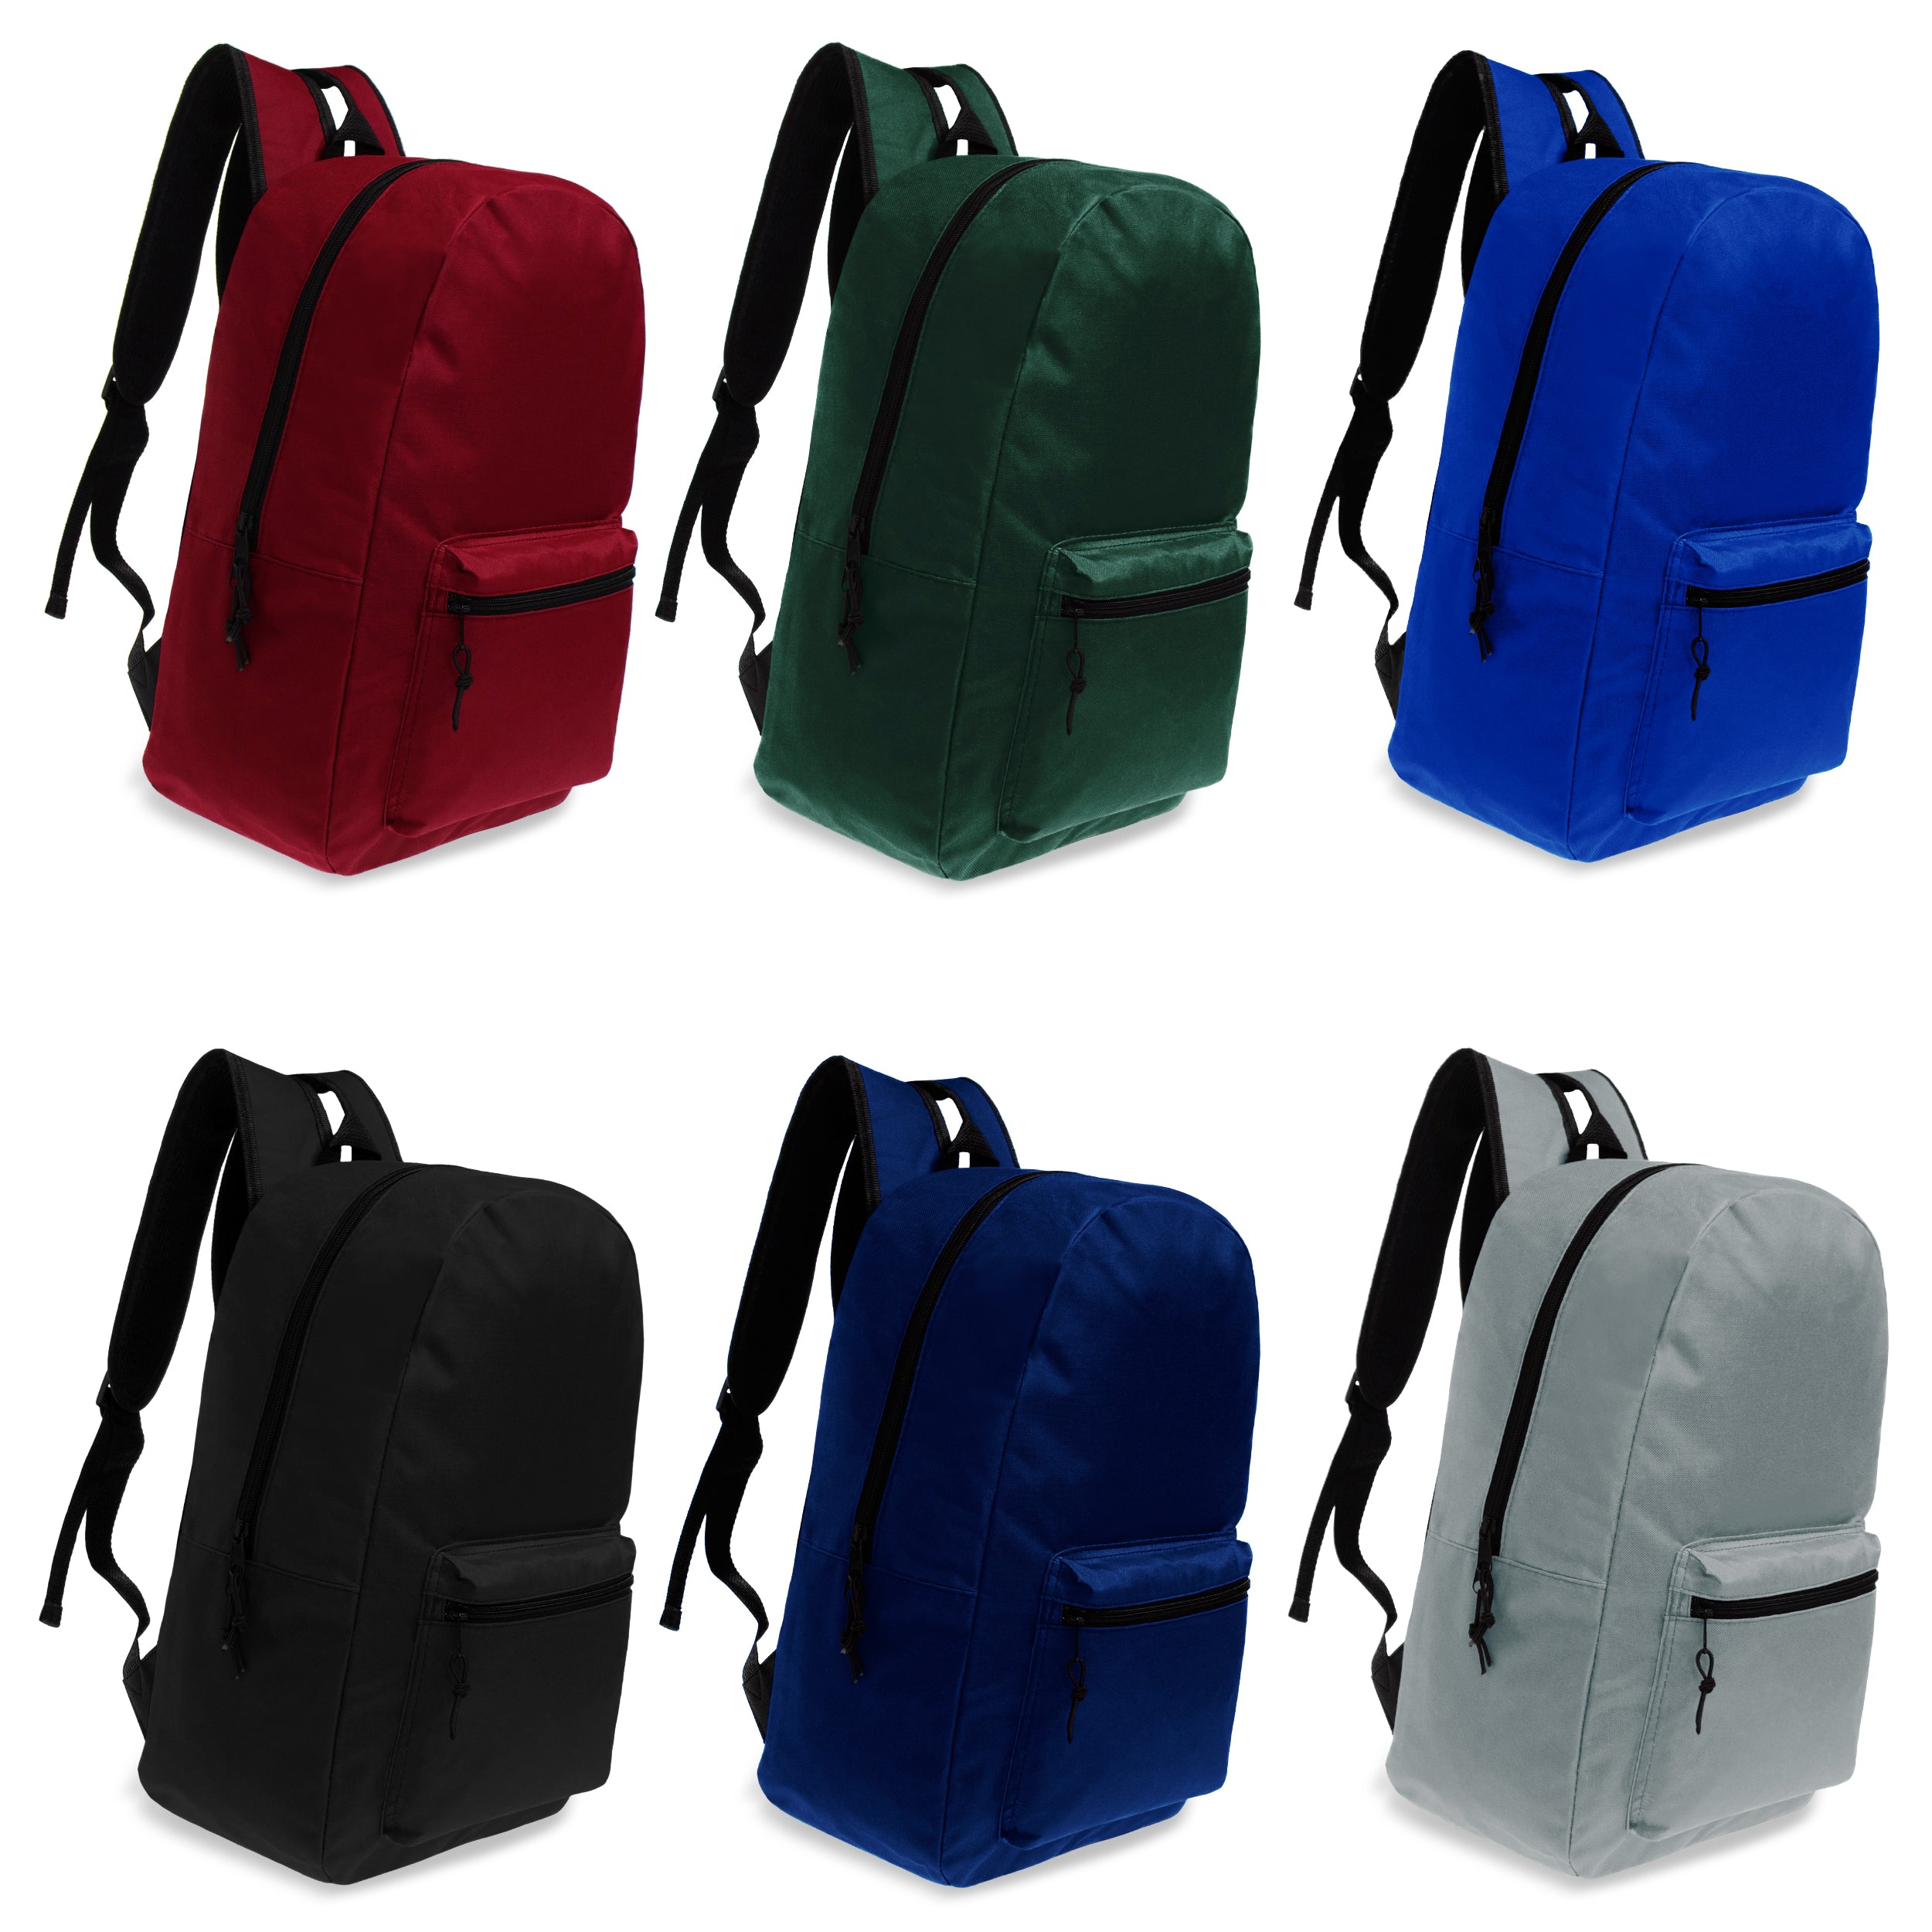 15 inches School Backpacks for Kids In Assorted Colors Wholesale School Supplies - Kit Case Of 12